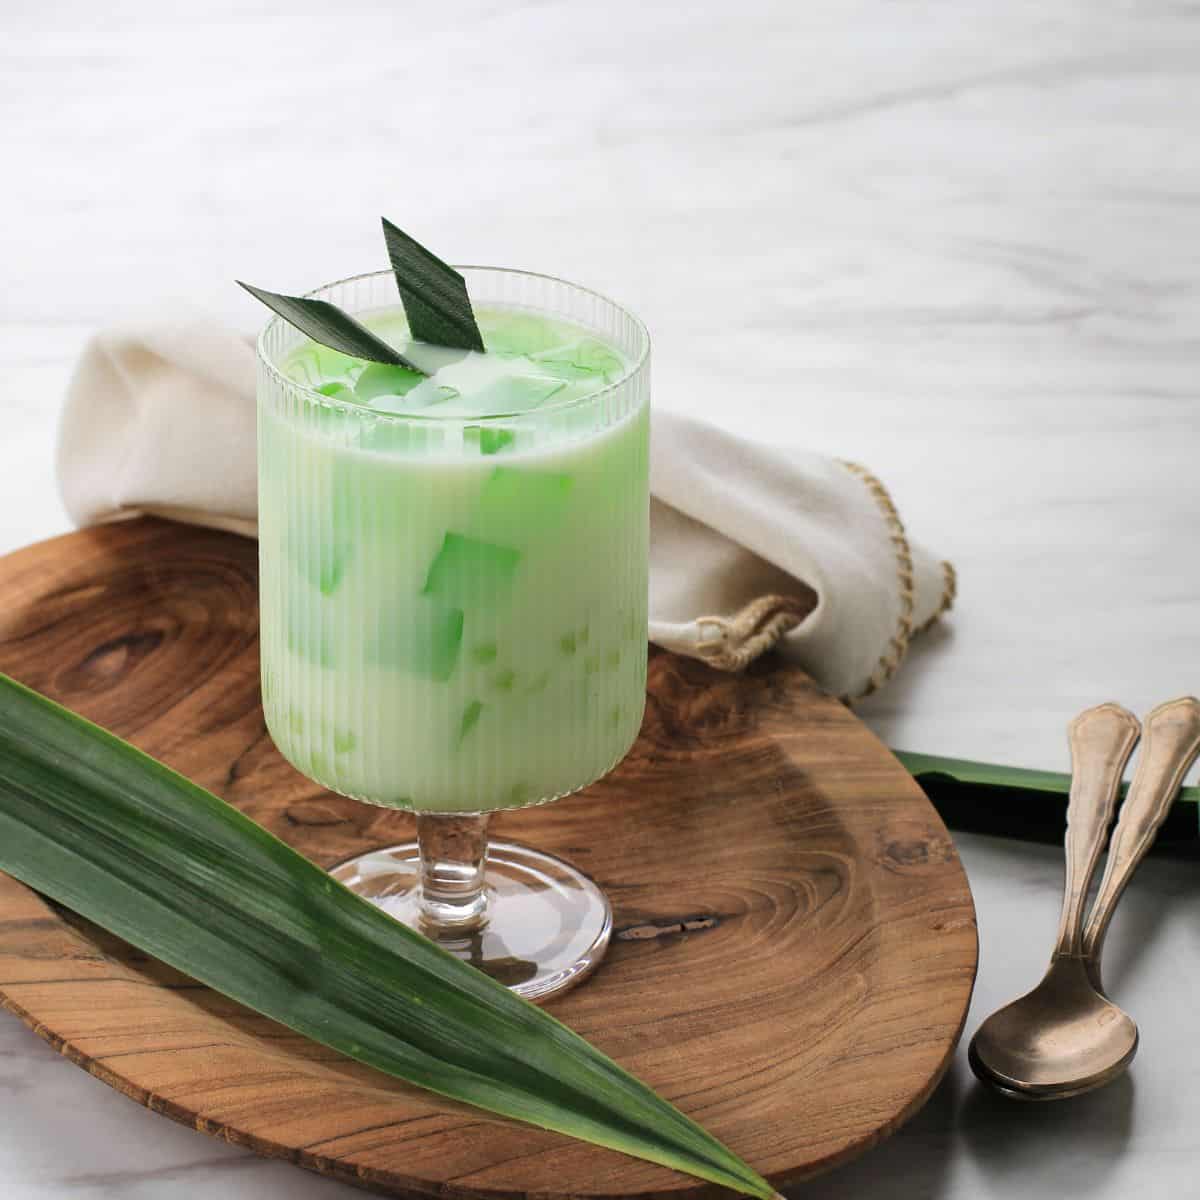 A glass of green tea, a popular Filipino drink, with leaves on a wooden board.